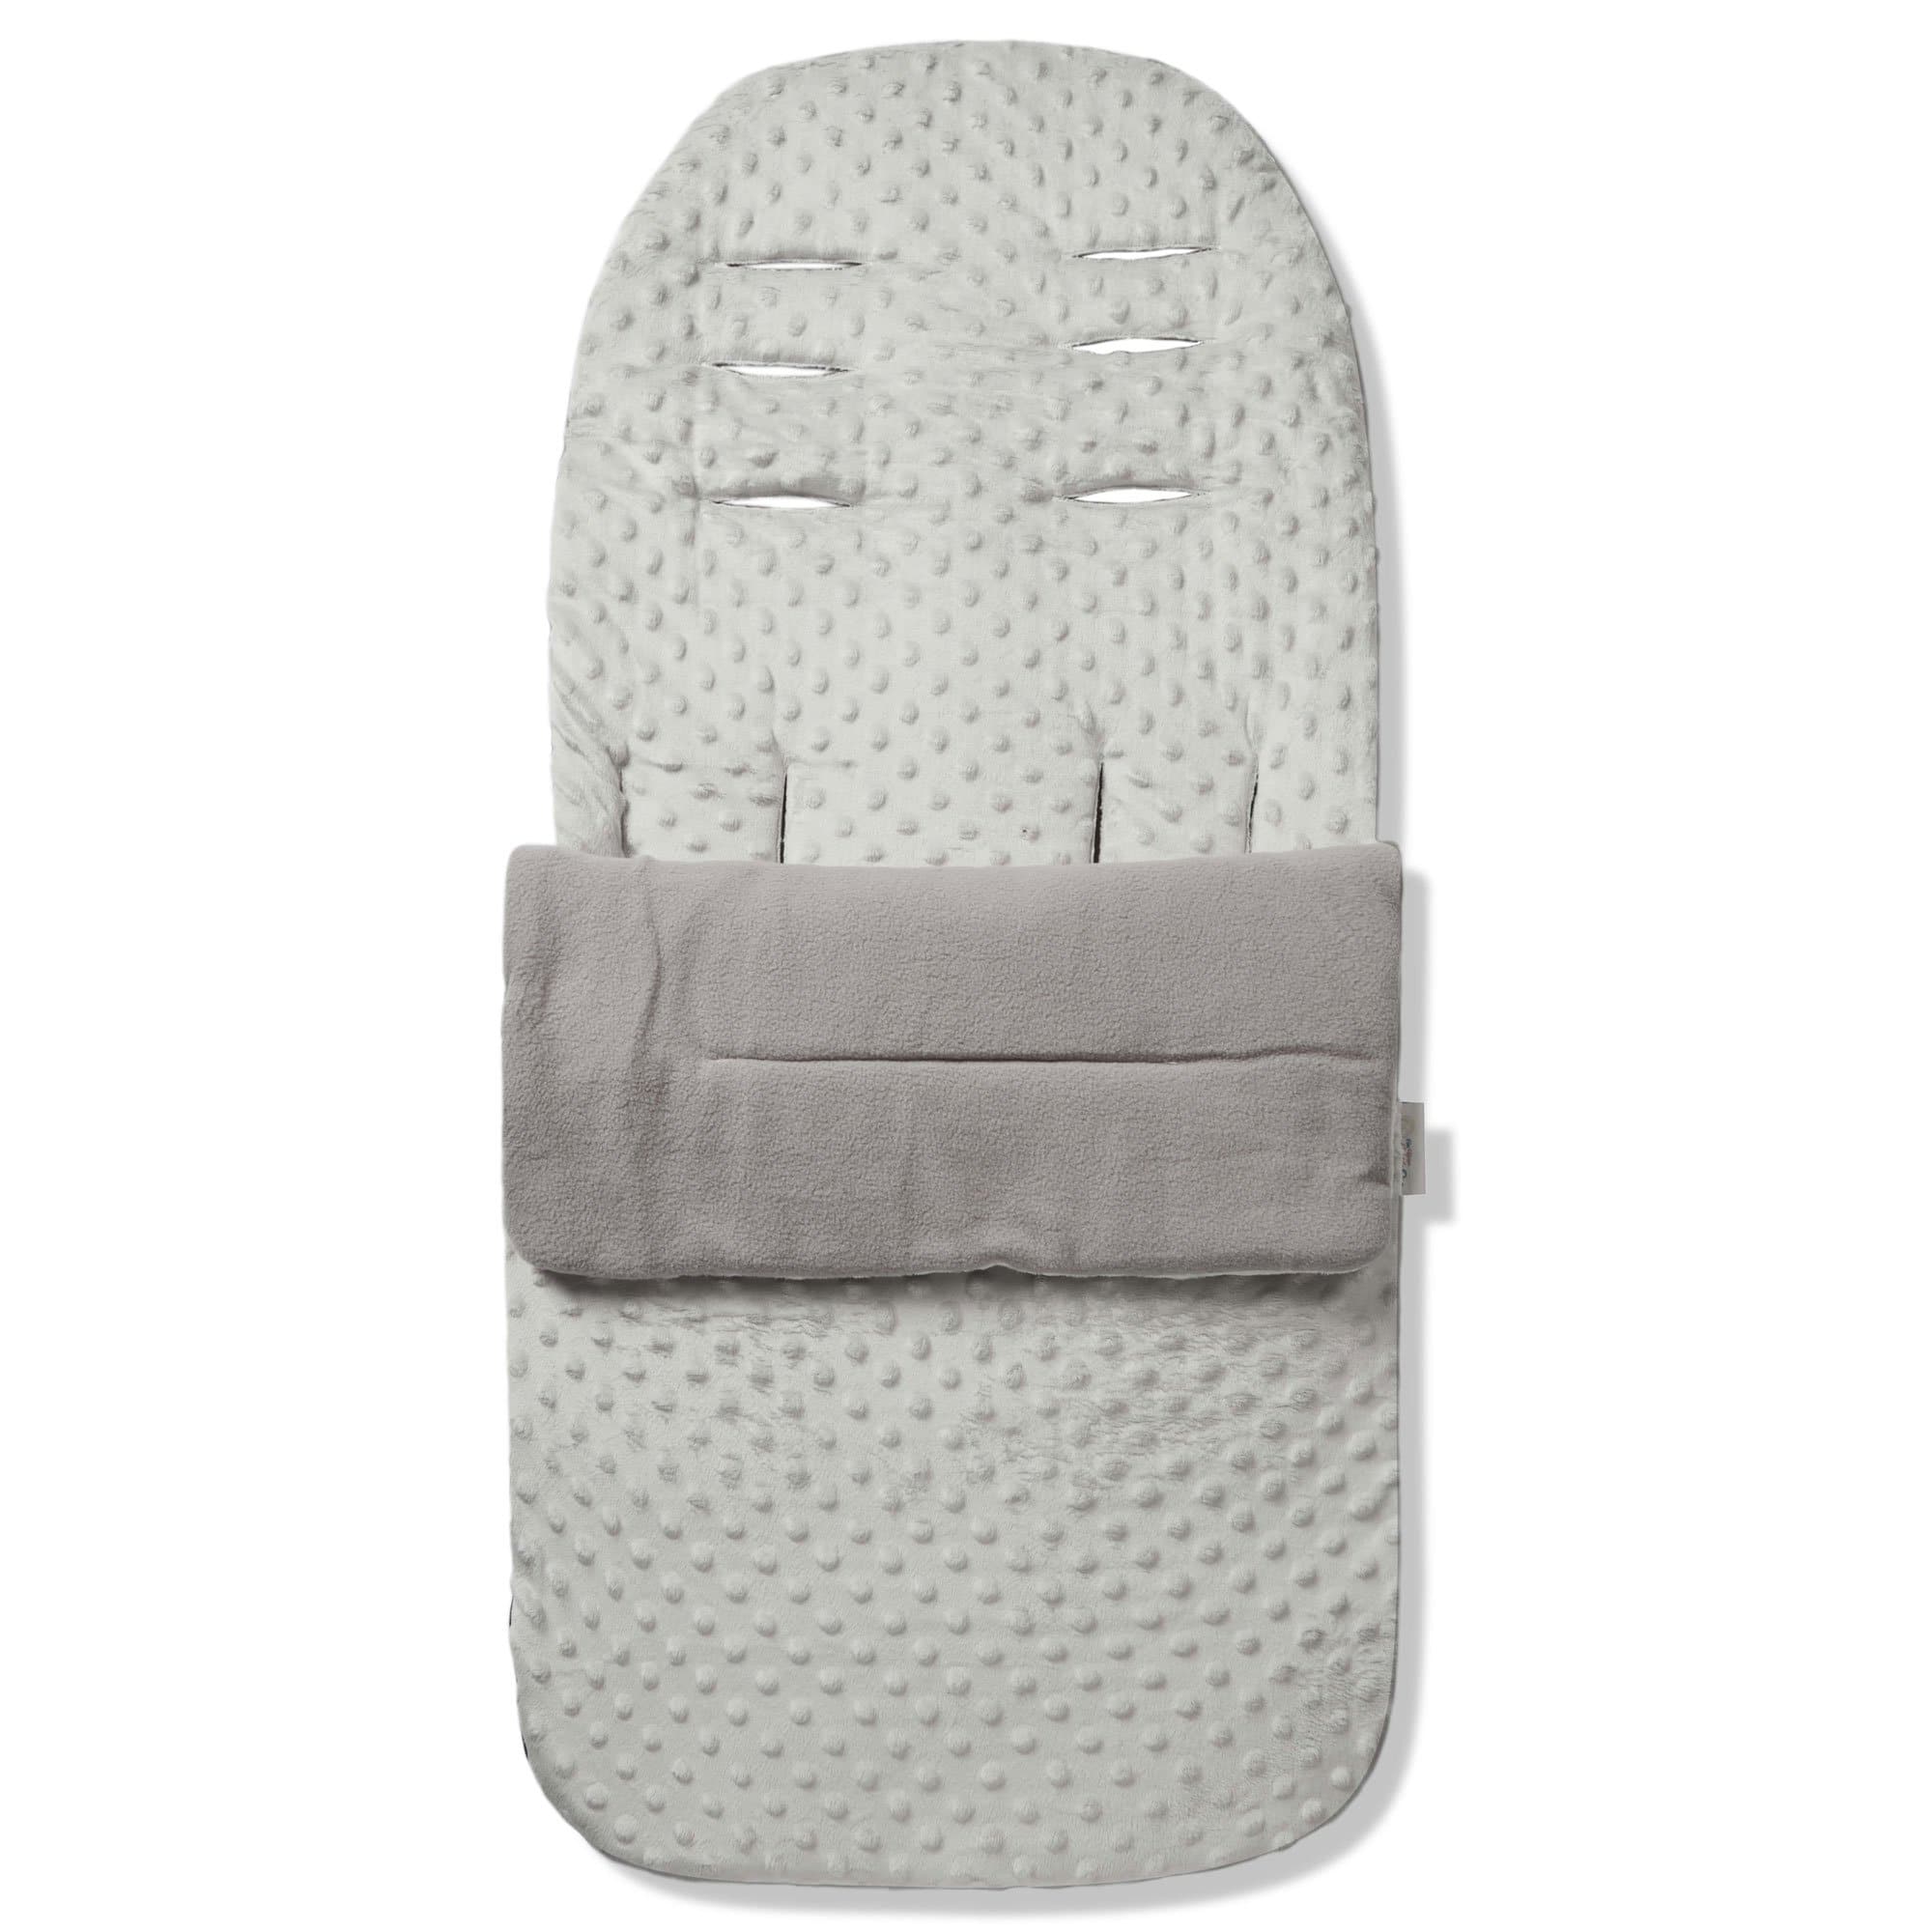 Dimple Footmuff / Cosy Toes Compatible with XTS - Grey / Fits All Models | For Your Little One